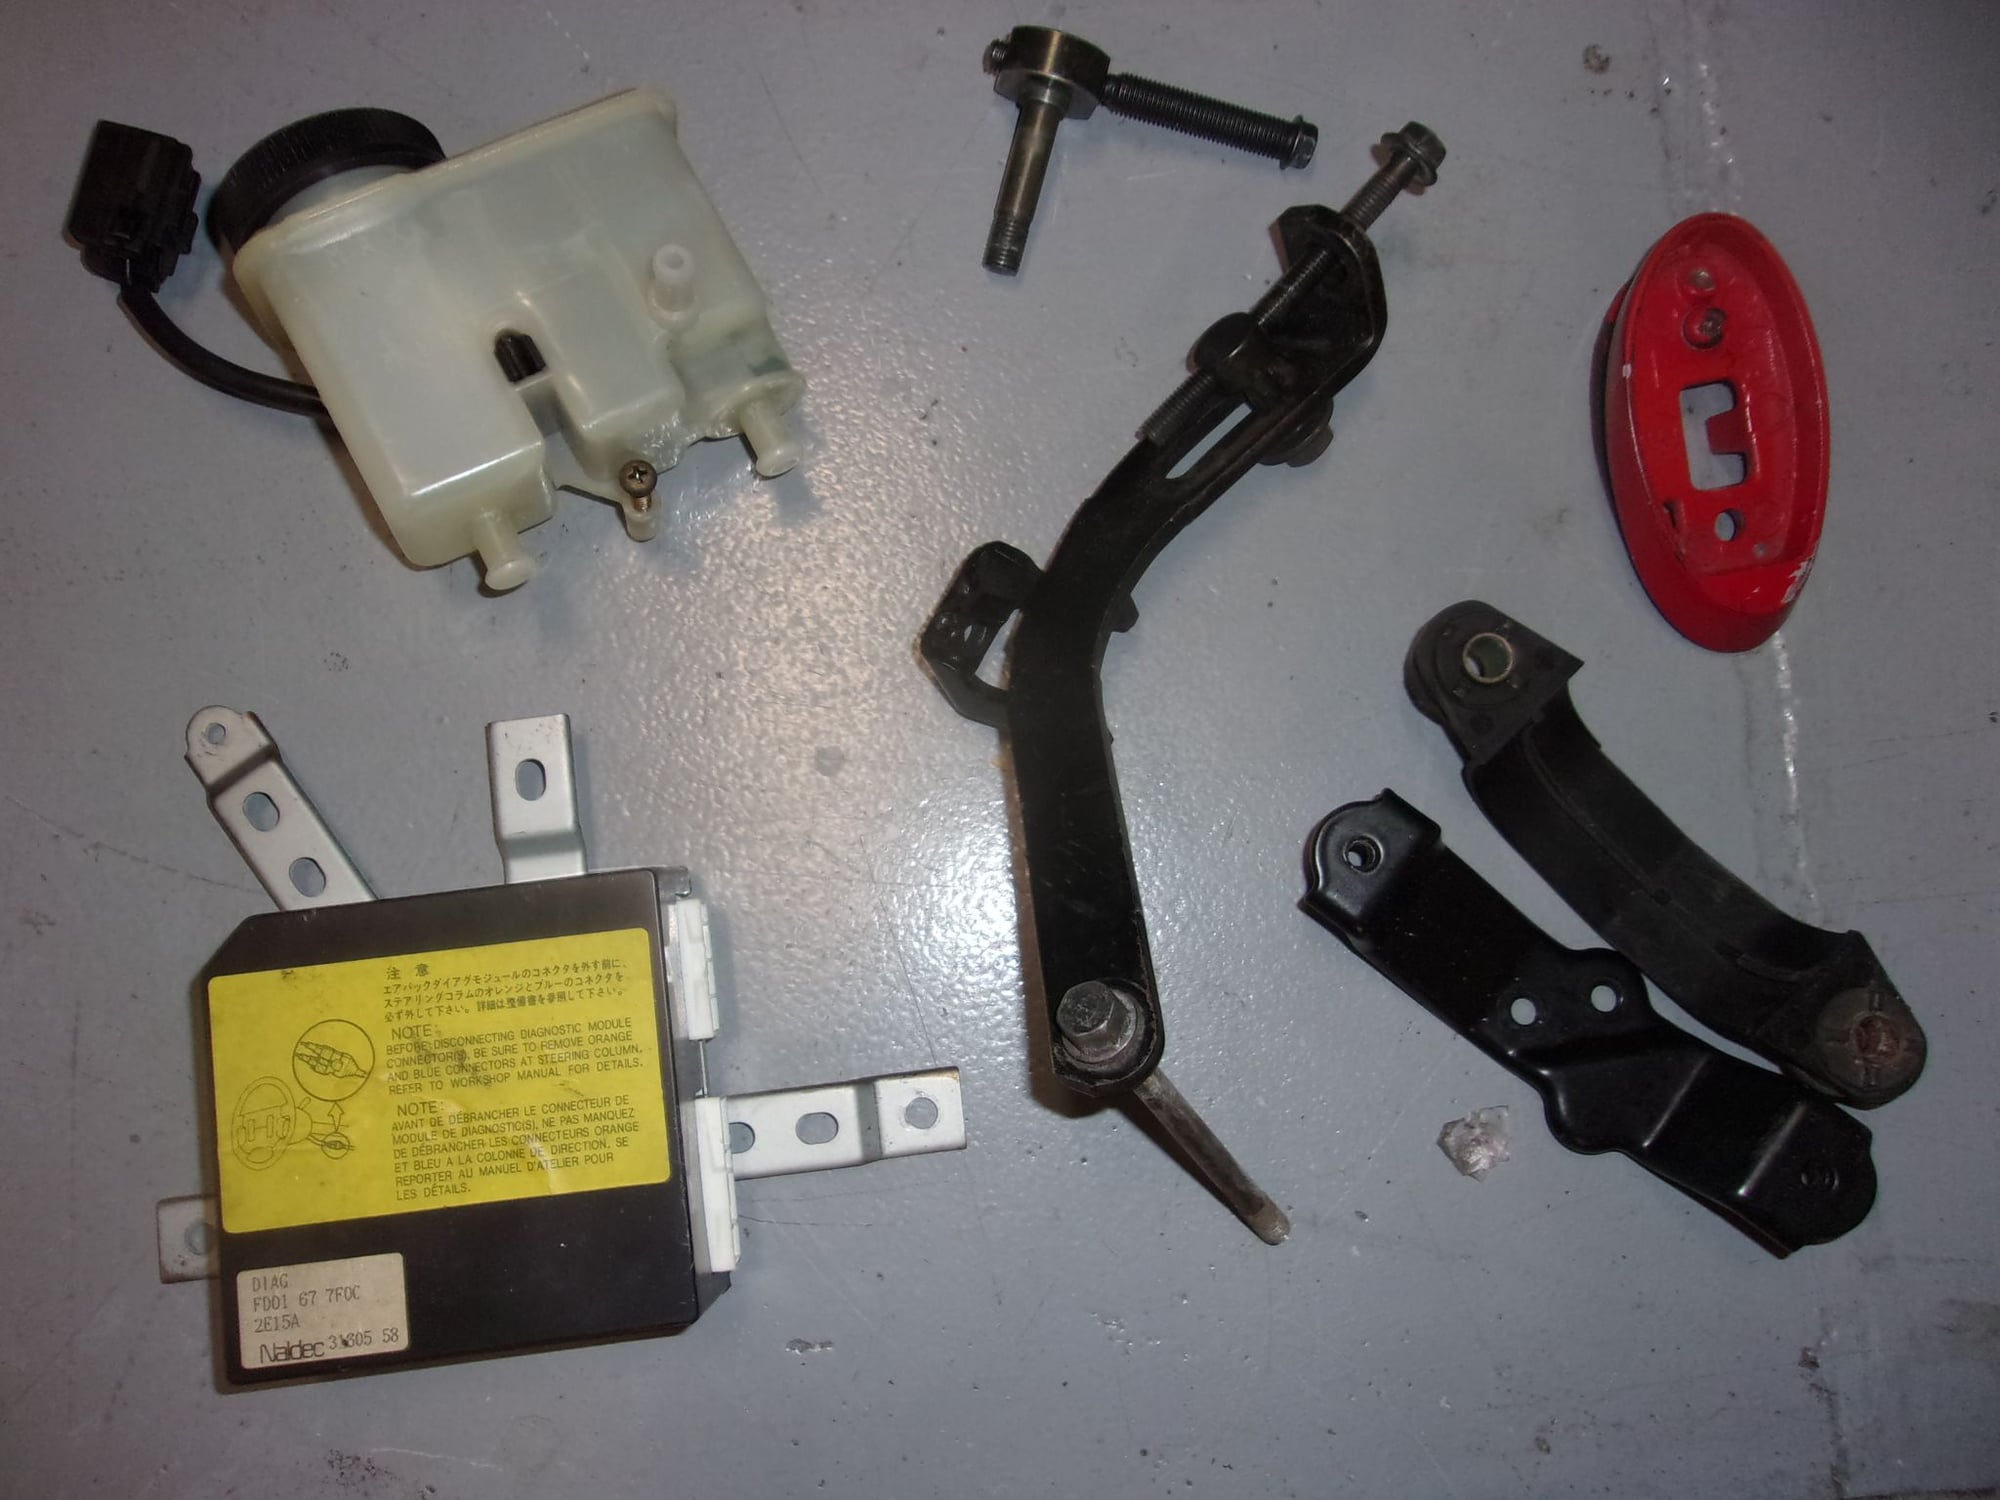 Miscellaneous - Hard-To-Find Parts #18 - Used - 1993 to 1995 Mazda RX-7 - Murfreesboro, TN 37130, United States